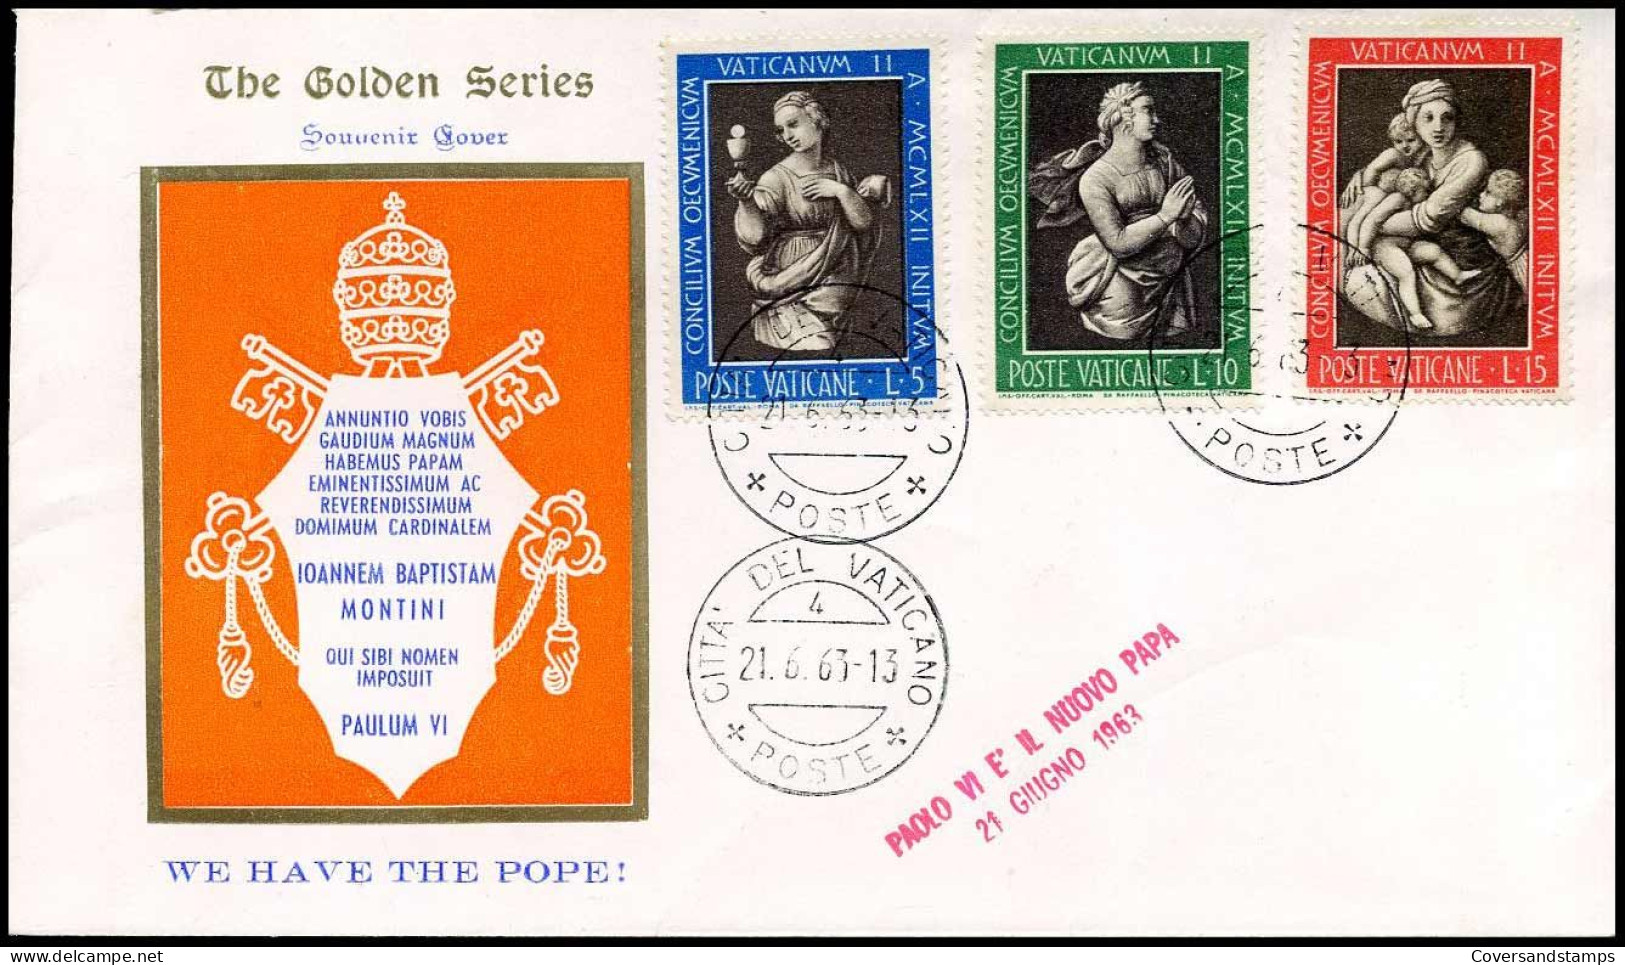 FDC - The Golden Series - We Have The Pope - FDC